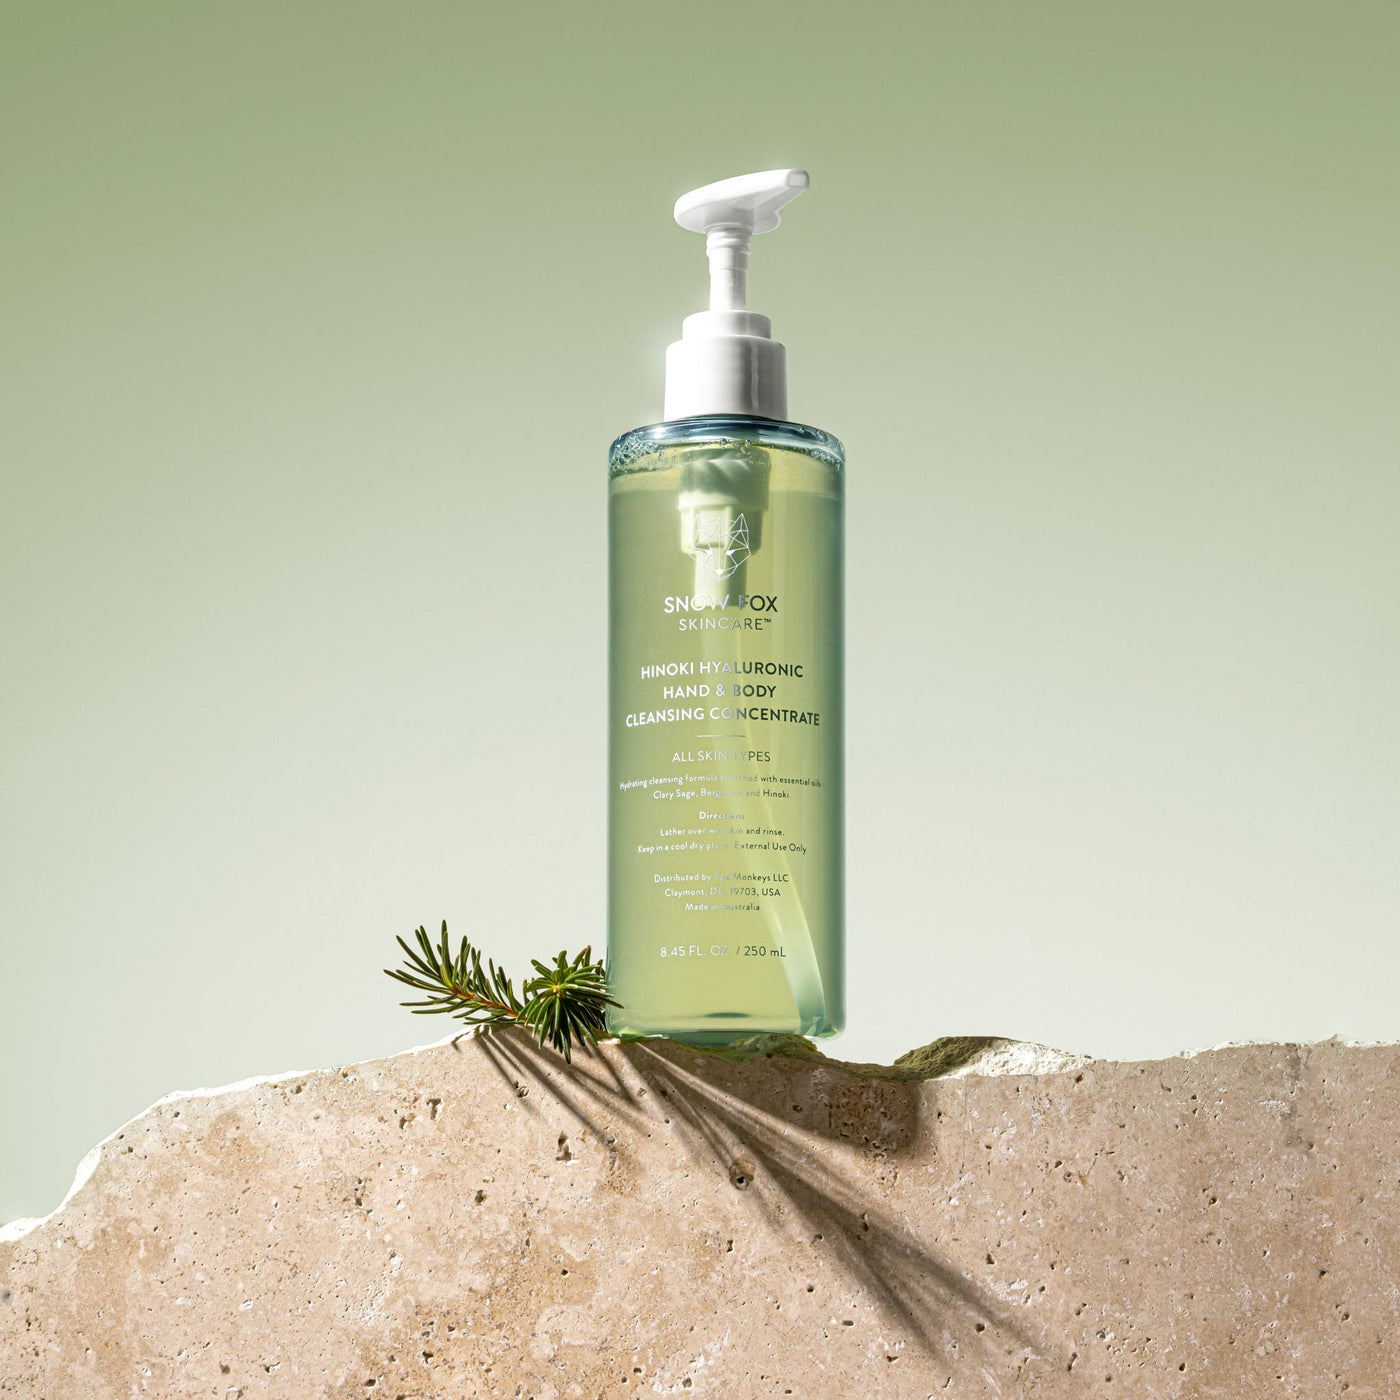 Hinoki Hand & Body Cleansing Concentrate